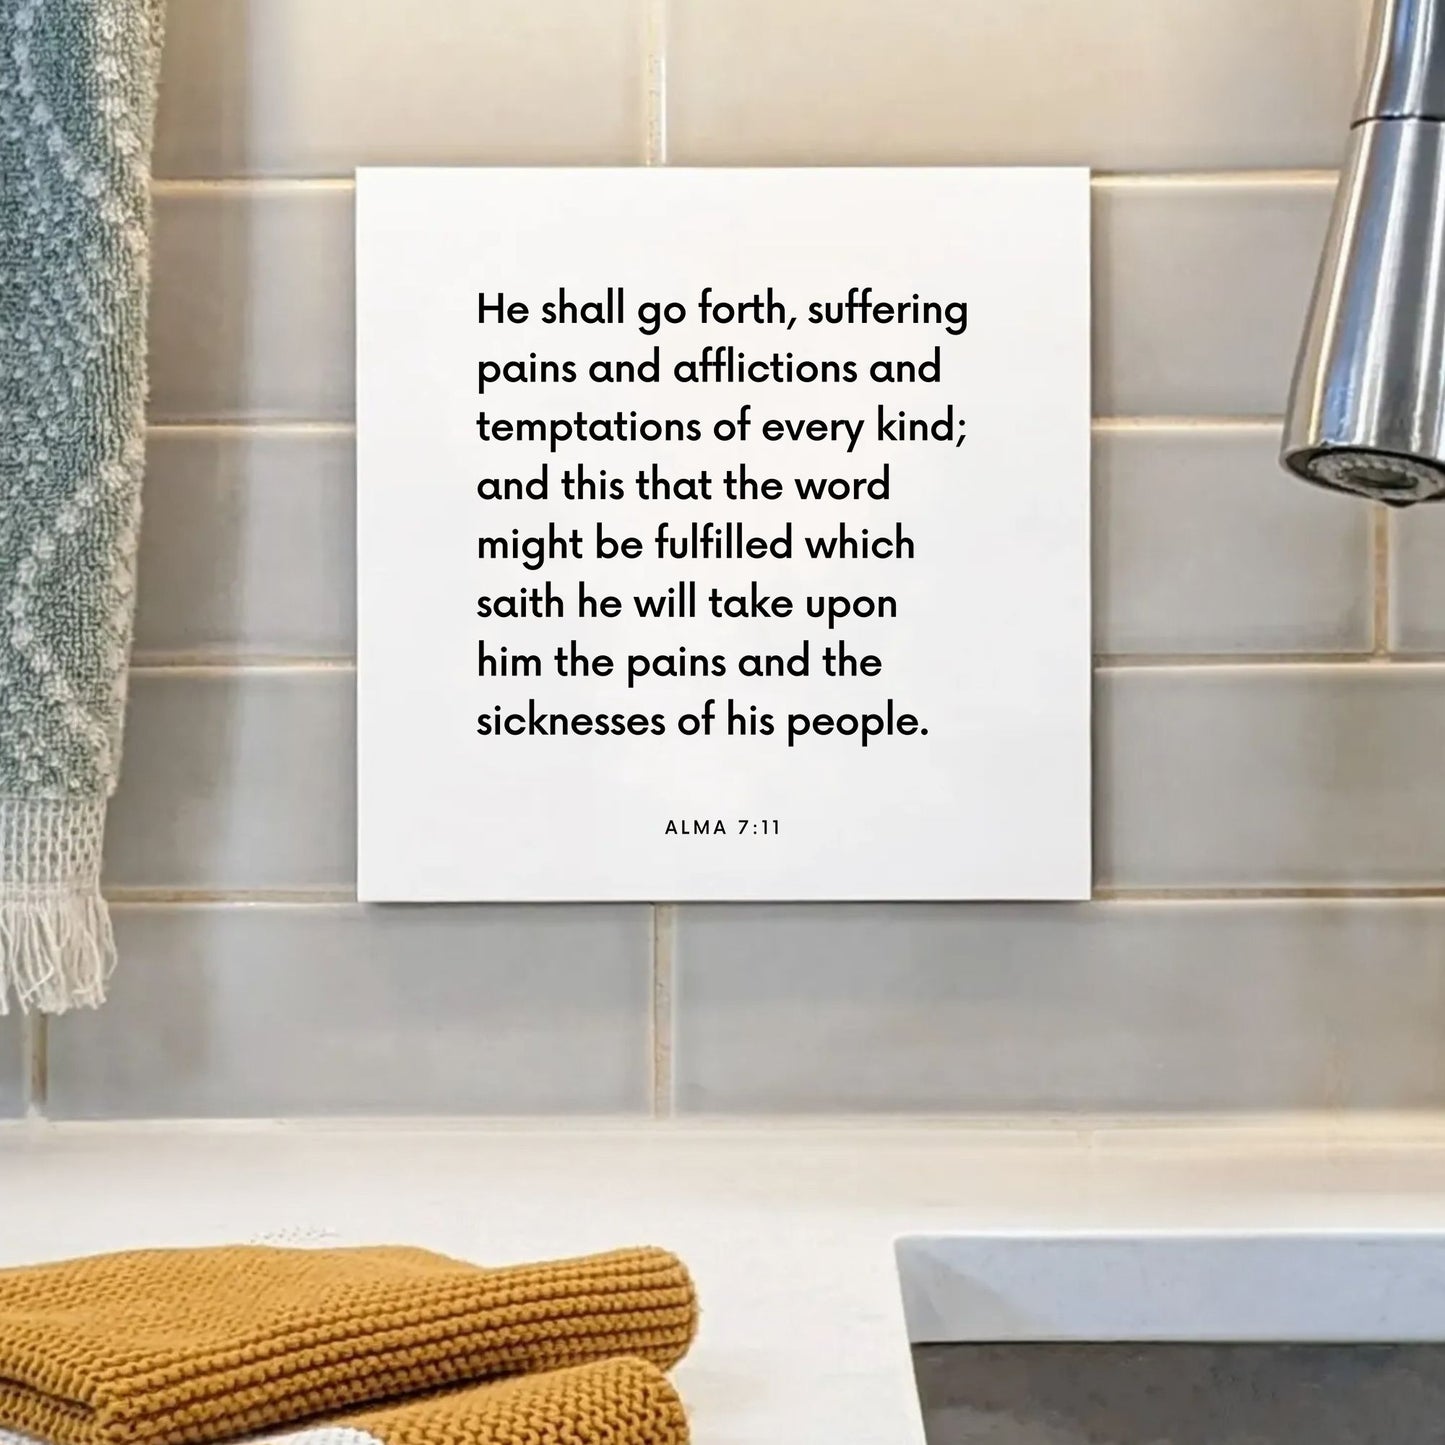 Sink mouting of the scripture tile for Alma 7:11 - "He will take upon him the pains and sicknesses of his people"